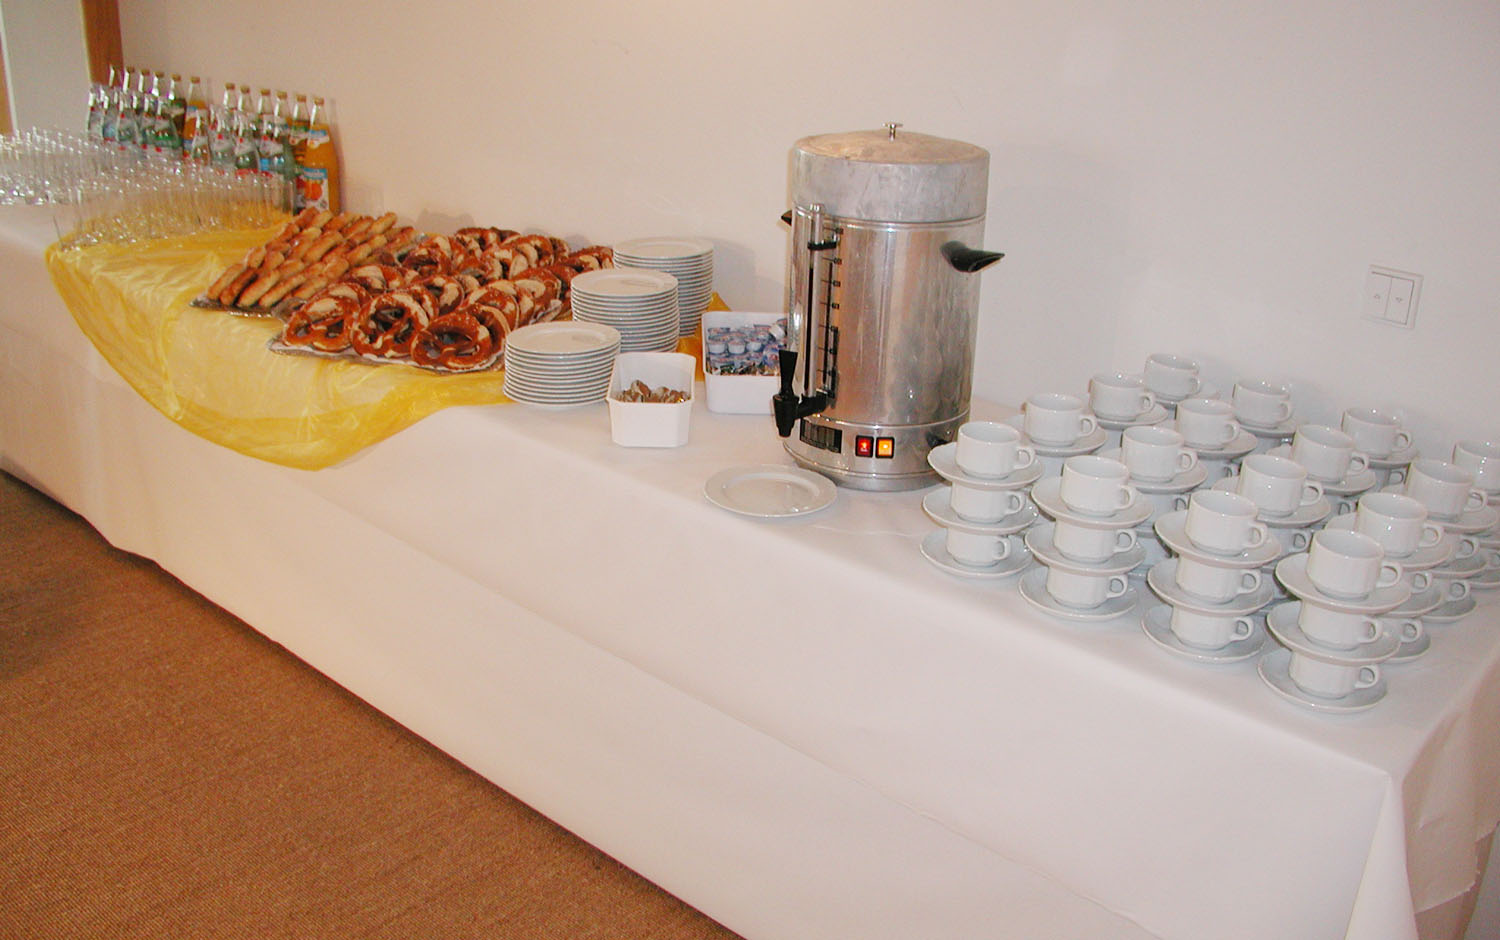 Example of a small breakfast buffet